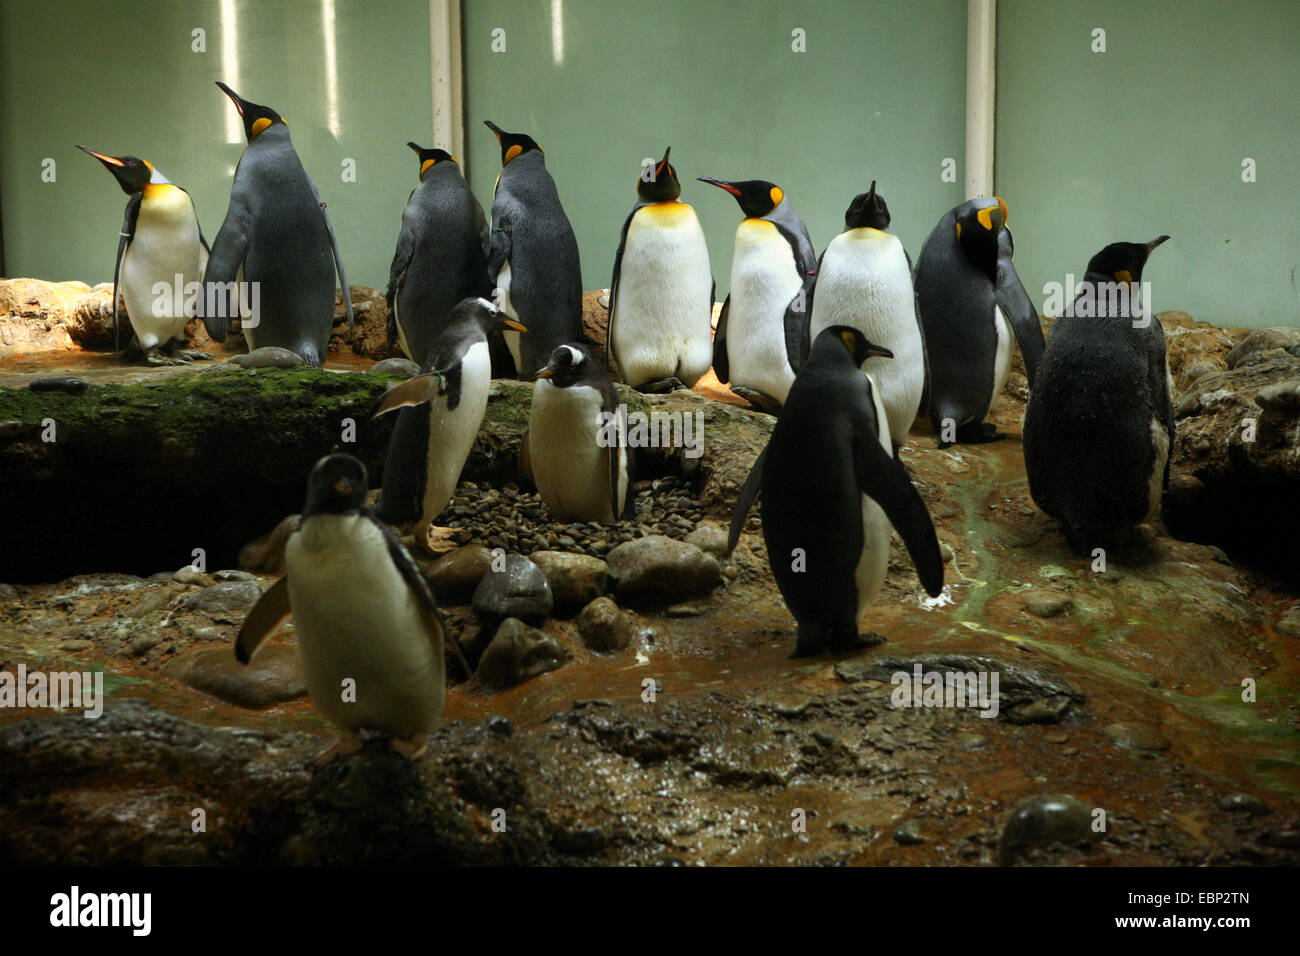 King penguins (Aptenodytes patagonicus) and gentoo penguins (Pygoscelis papua) at Zoo Basel, Switzerland. Gentoo penguins are three smaller penguins seen in the foreground. Stock Photo